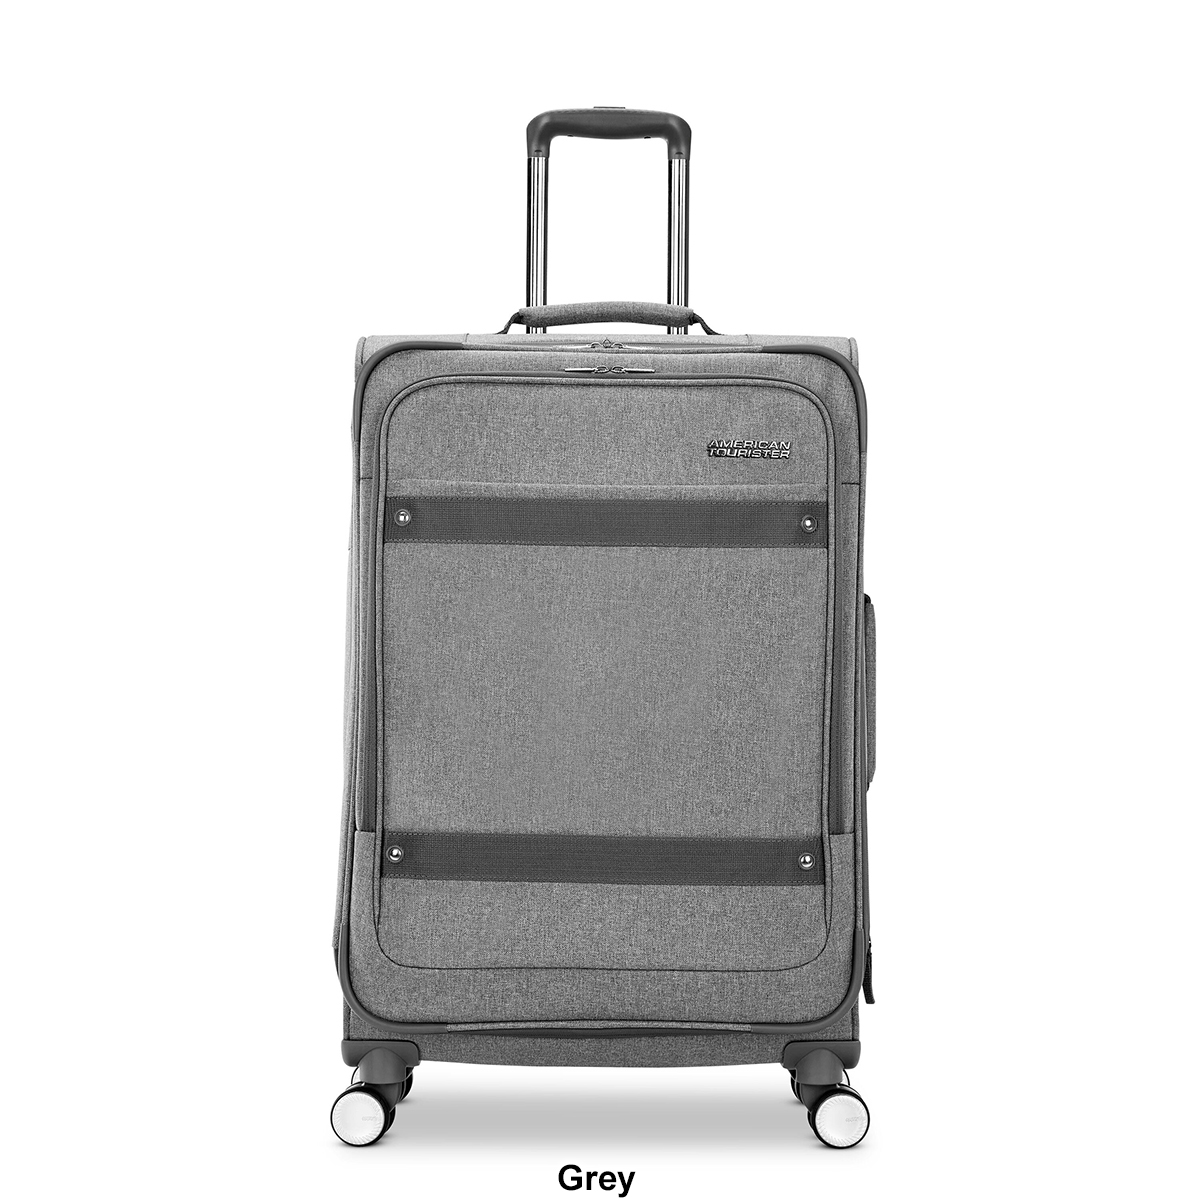 American Tourister(R) Whim 25in. Spinner Luggage